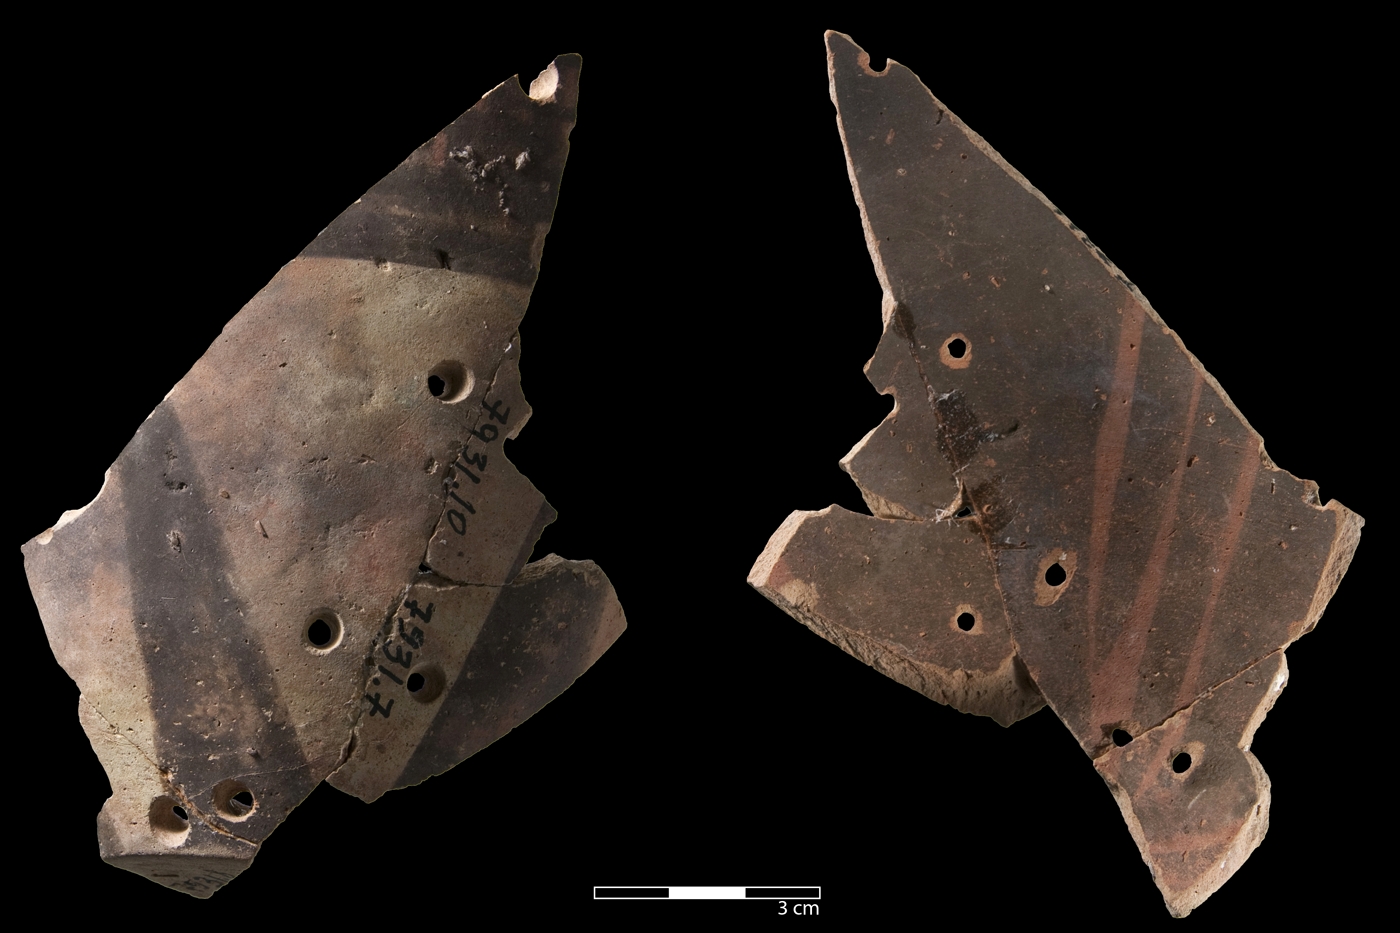 Meana Polytone sherd with multiple repair holes which have been drilled from the exterior (left) to the interior (right).